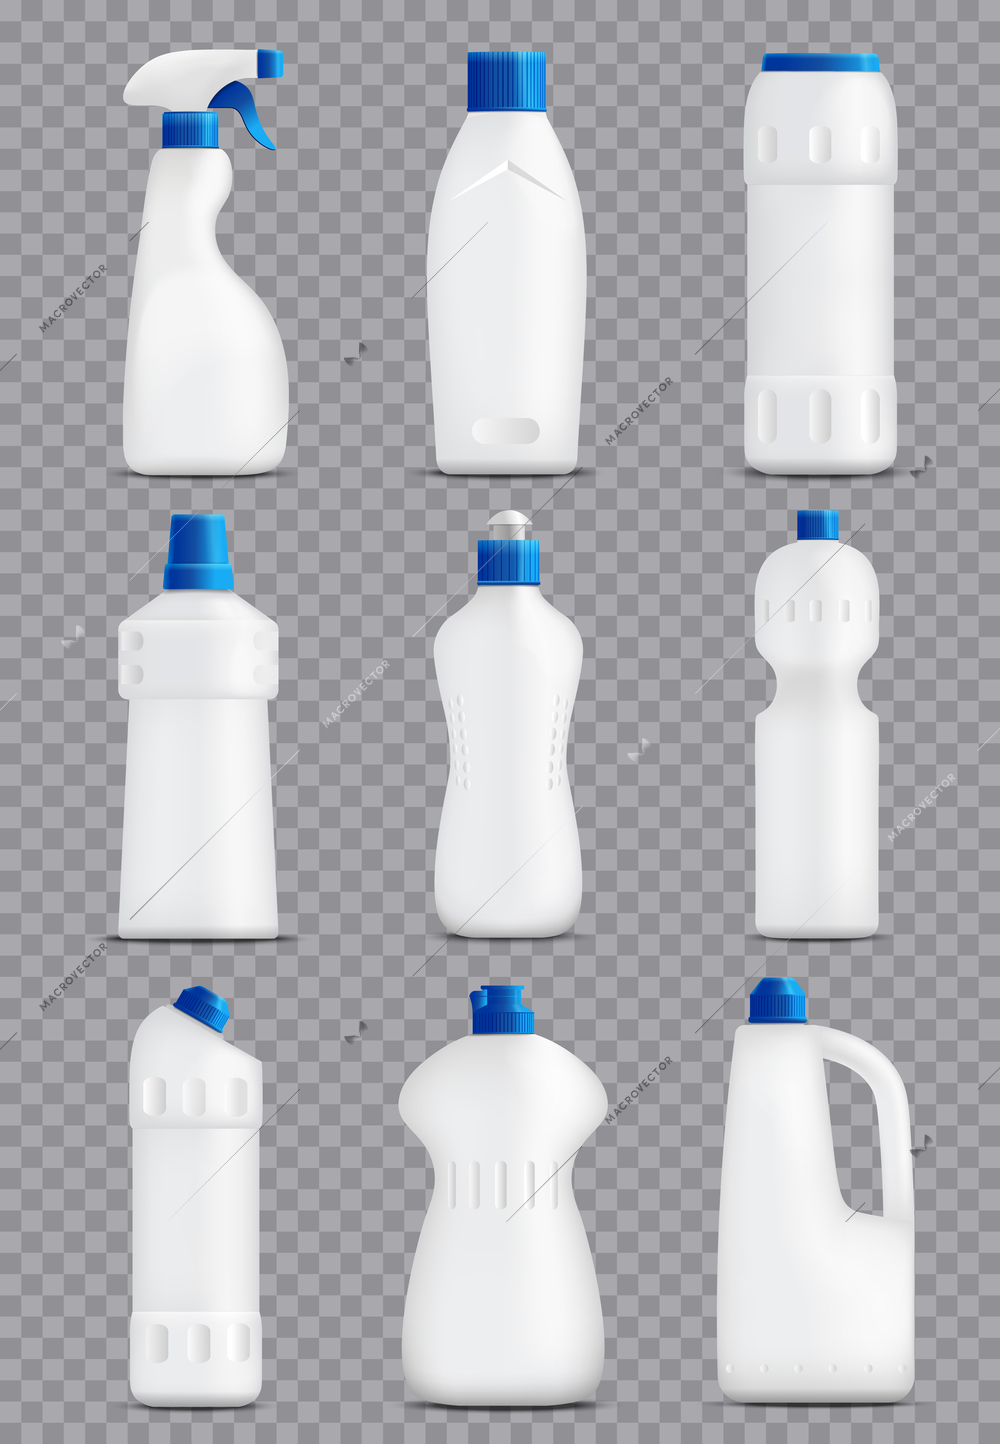 Detergent bottles realistic set of plastic packaging shapes for household chemicals with different pump caps vector illustration